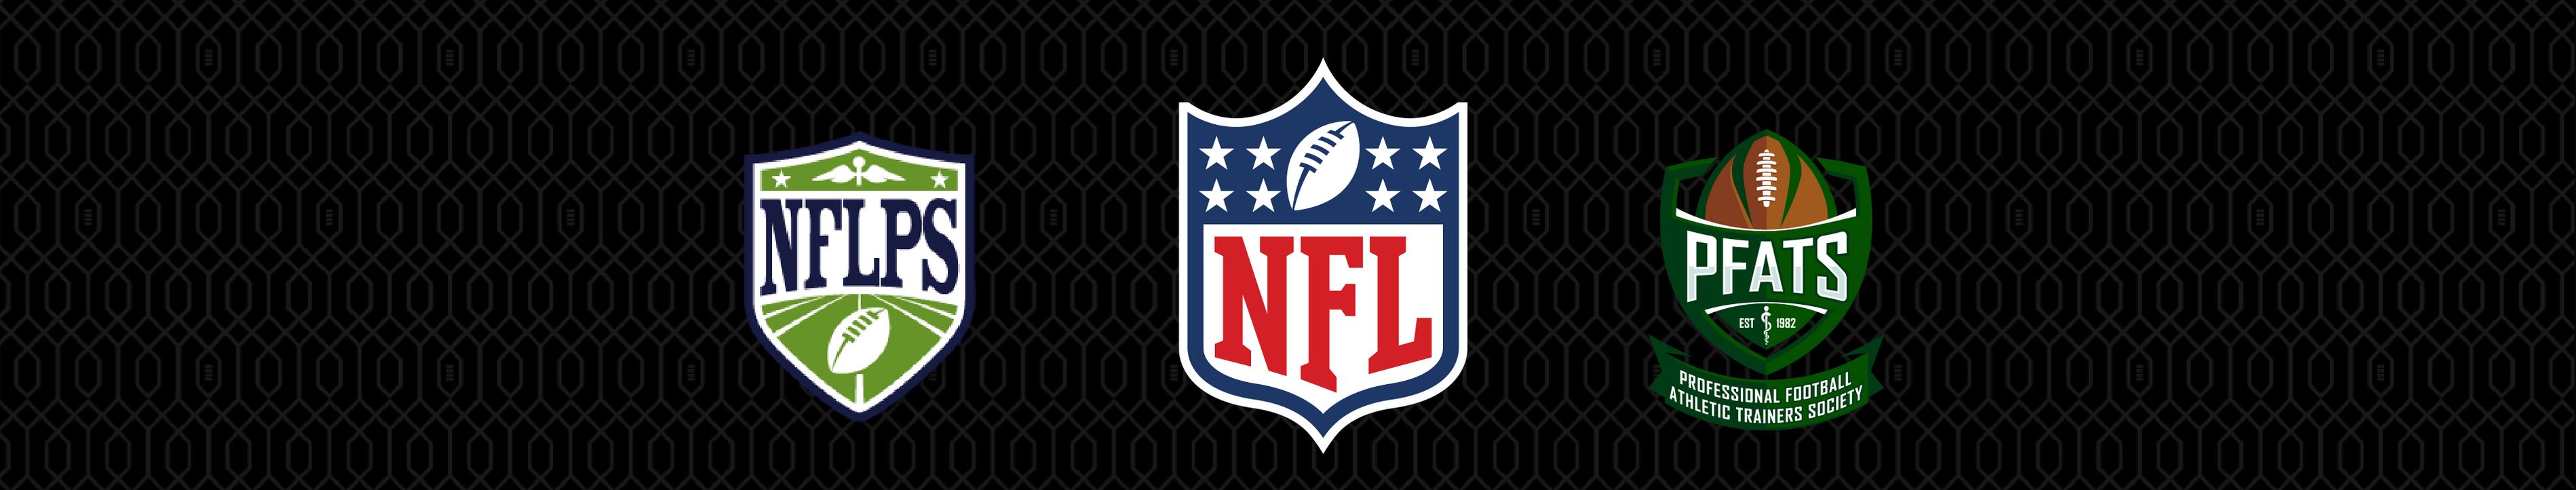 NFL, NFLPS and PFATS logos